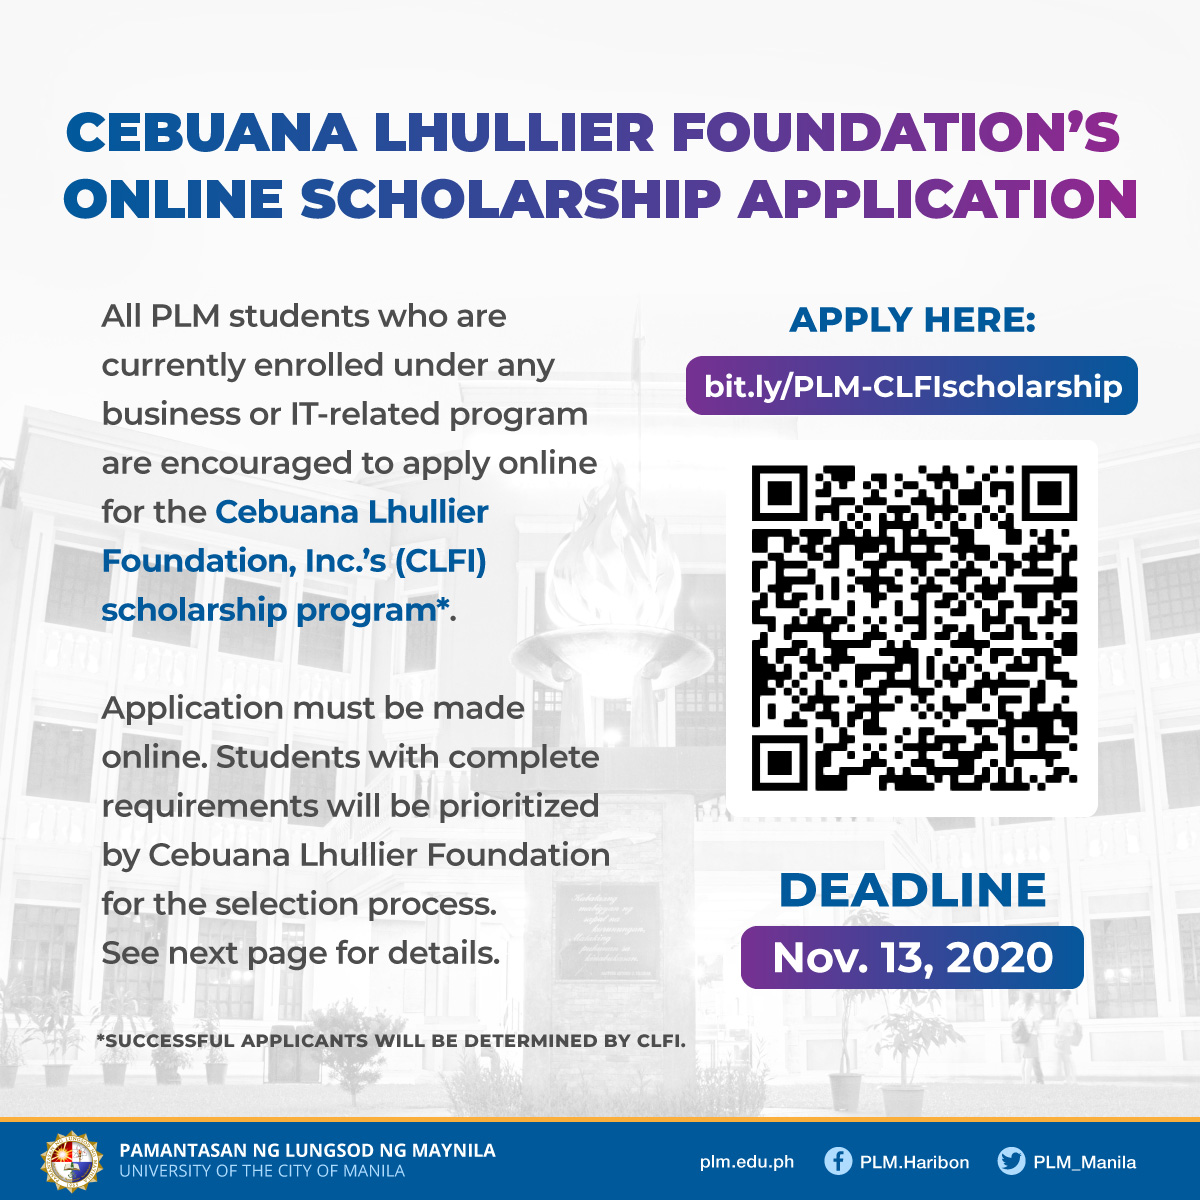 All PLM students who are currently enrolled under any business or IT-related program, are encouraged to apply online for the Cebuana Lhullier Foundation Inc.’s (CLFI) scholarship program.